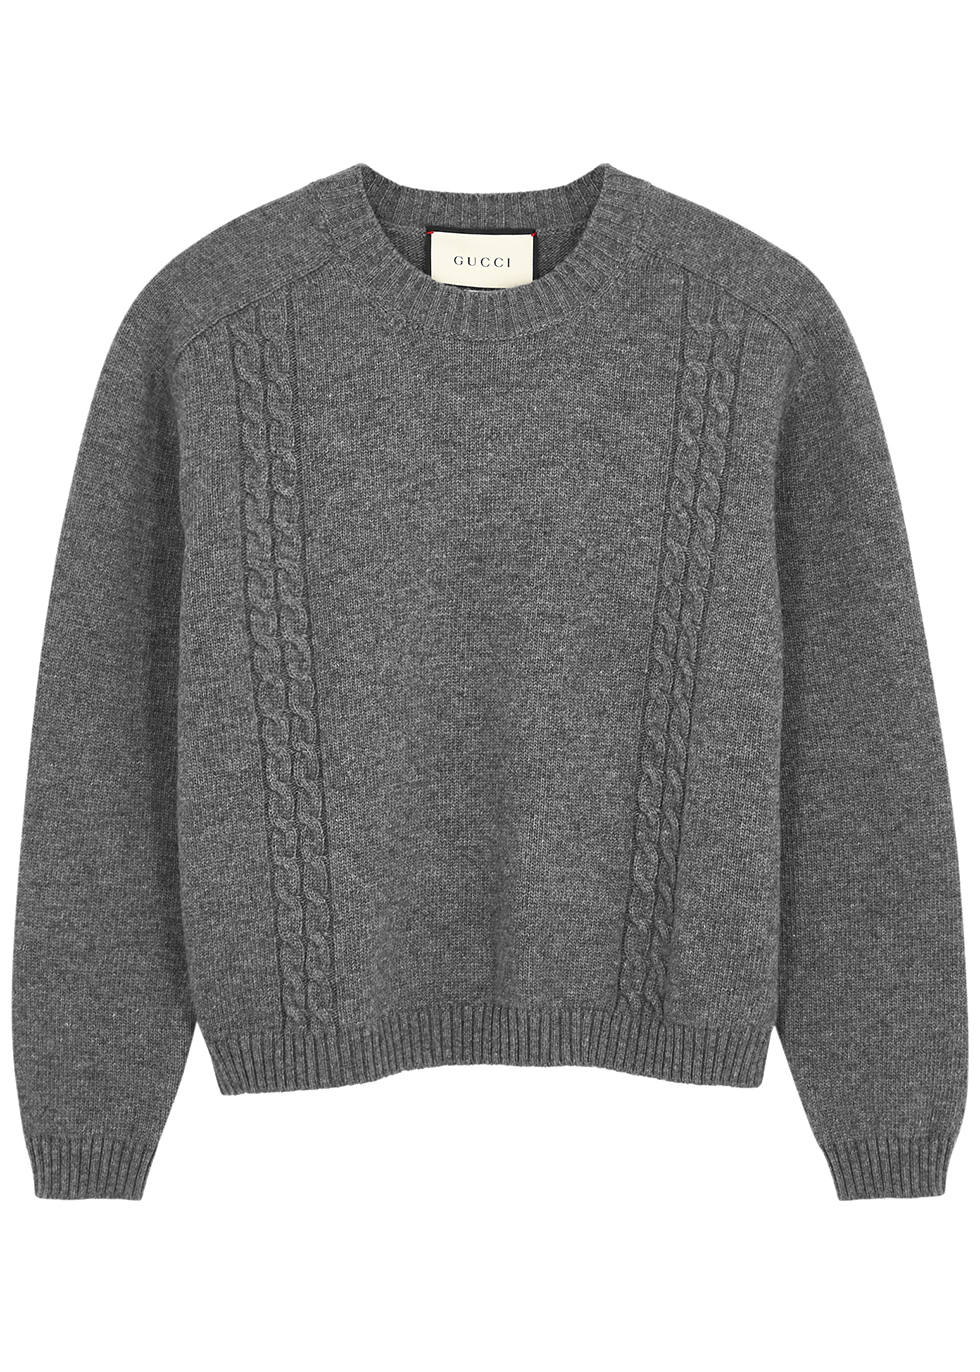 Gucci Grey mélange knitted jumper 